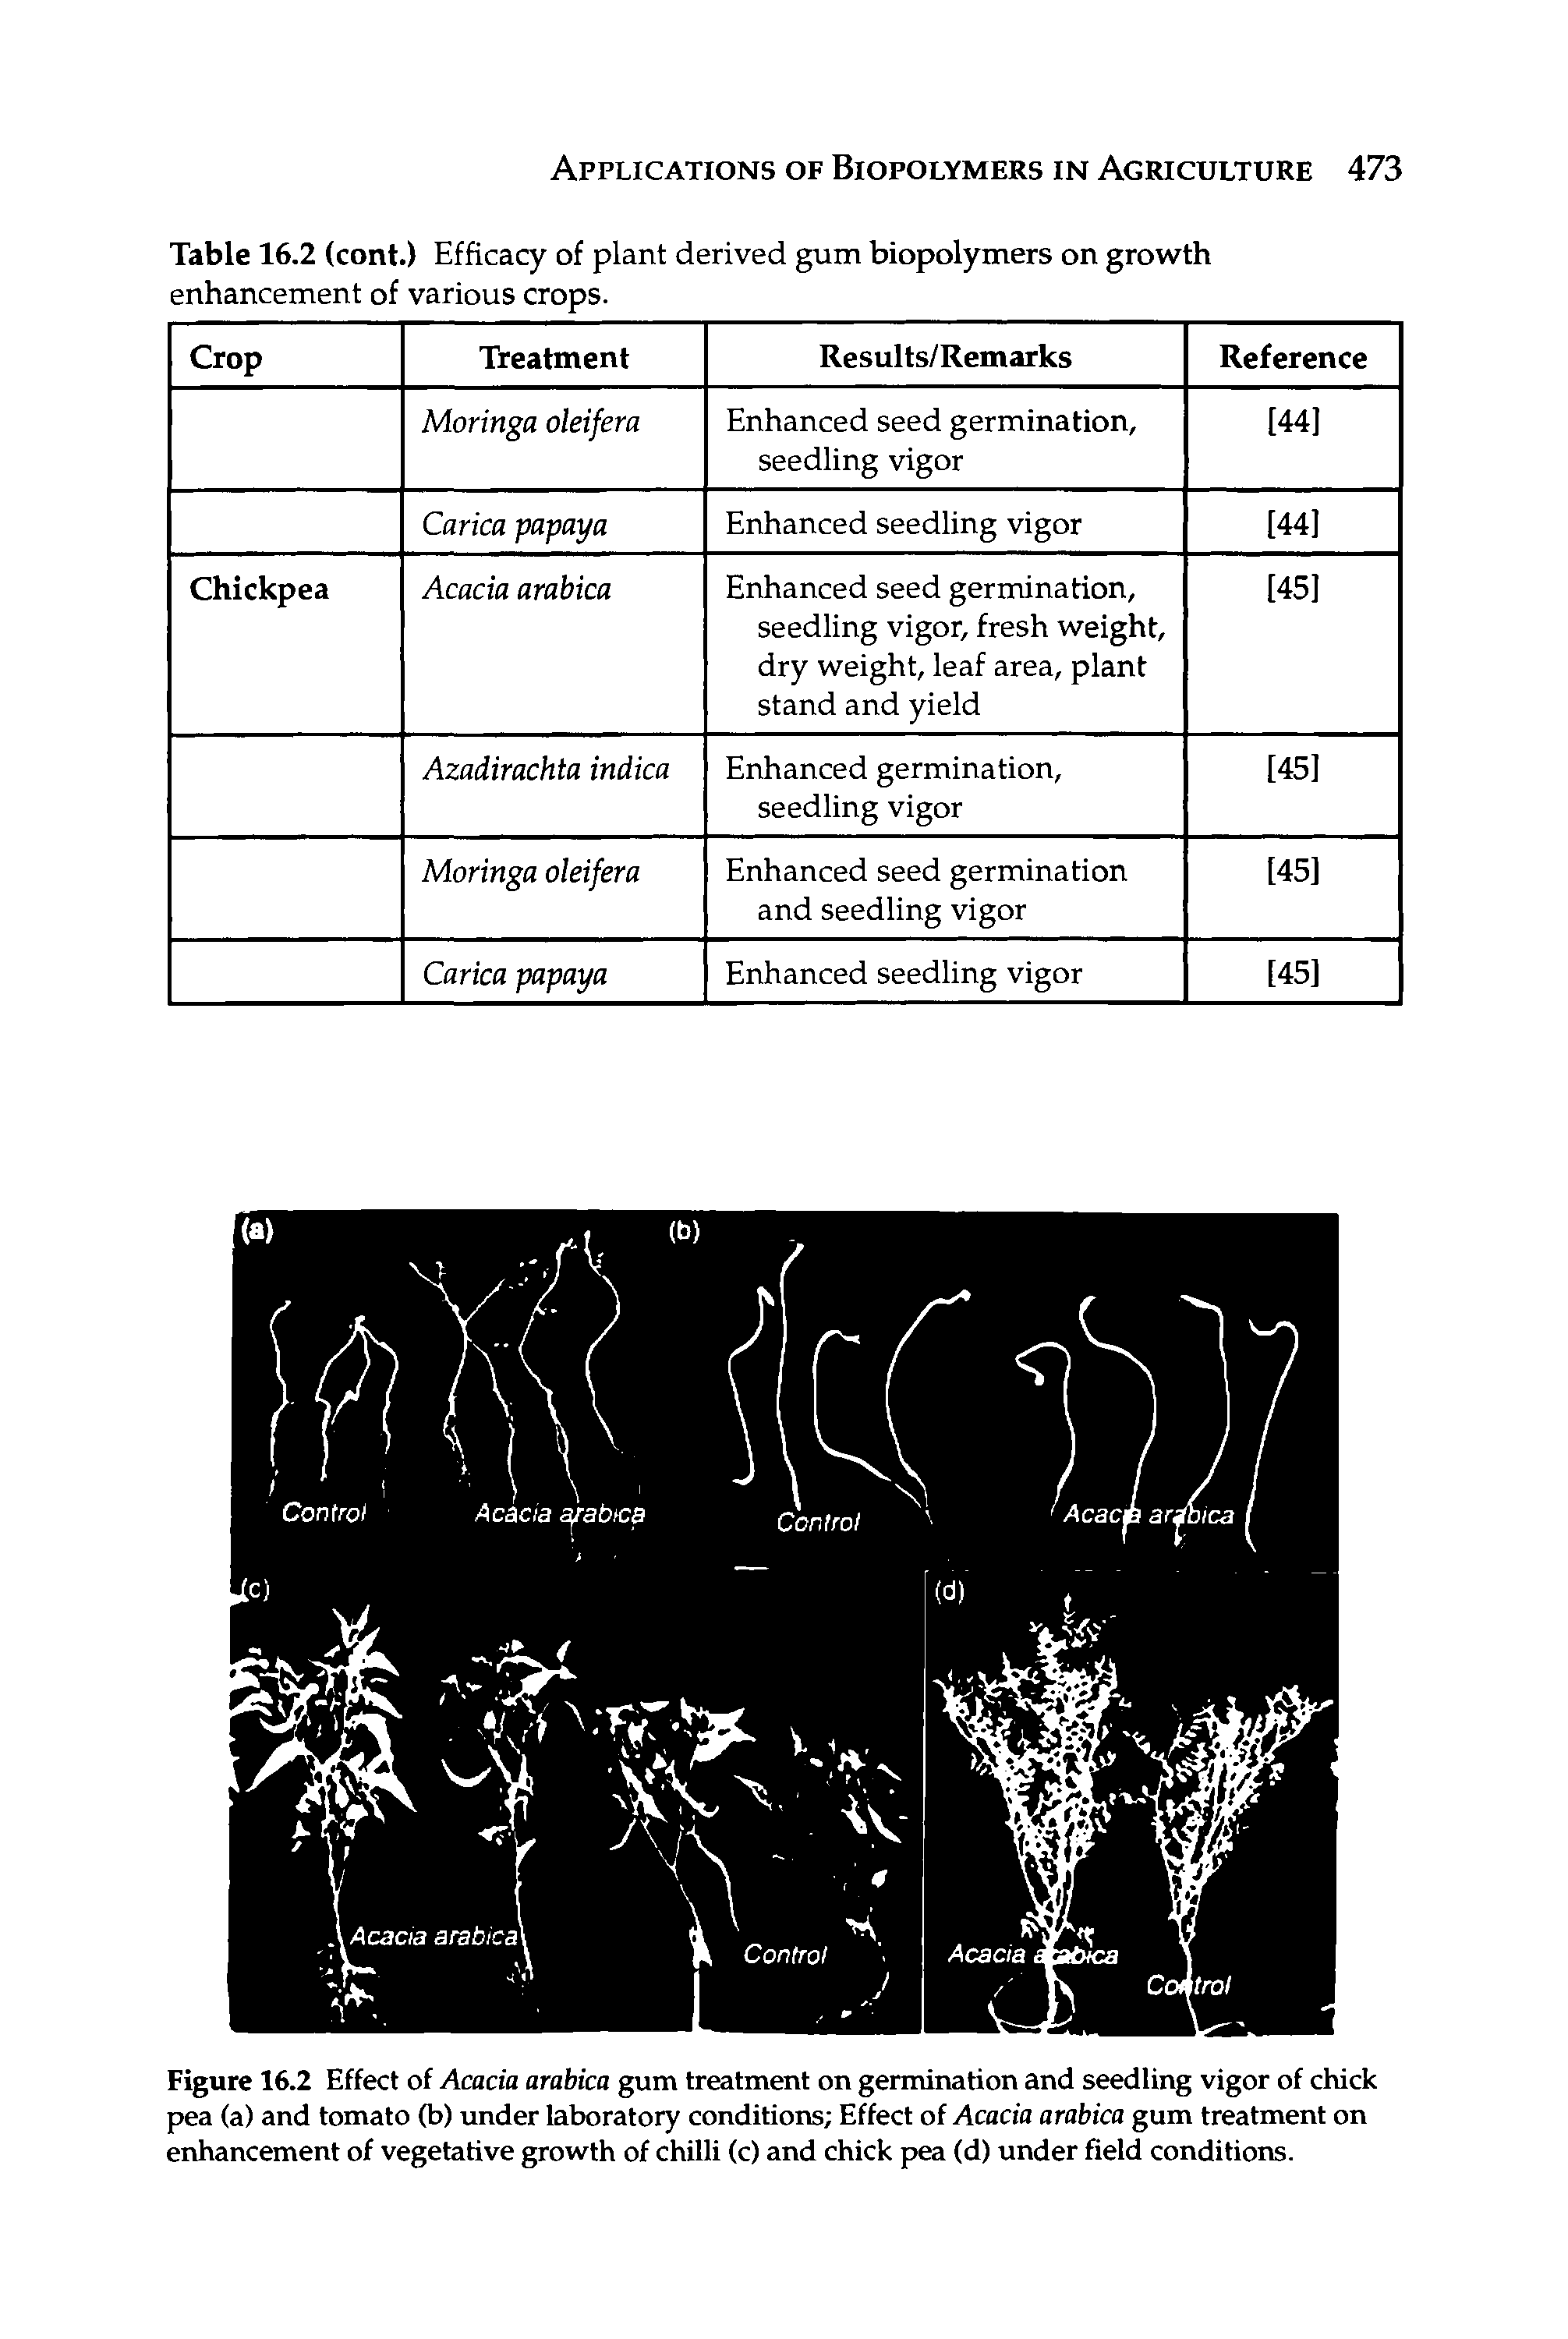 Figure 16.2 Effect of Acacia arabica gum treatment on germination and seedling vigor of chick pea (a) and tomato (b) under laboratory conditions Effect of Acacia arabica gum treatment on enhancement of vegetative growth of chilli (c) and chick pea (d) under field conditions.